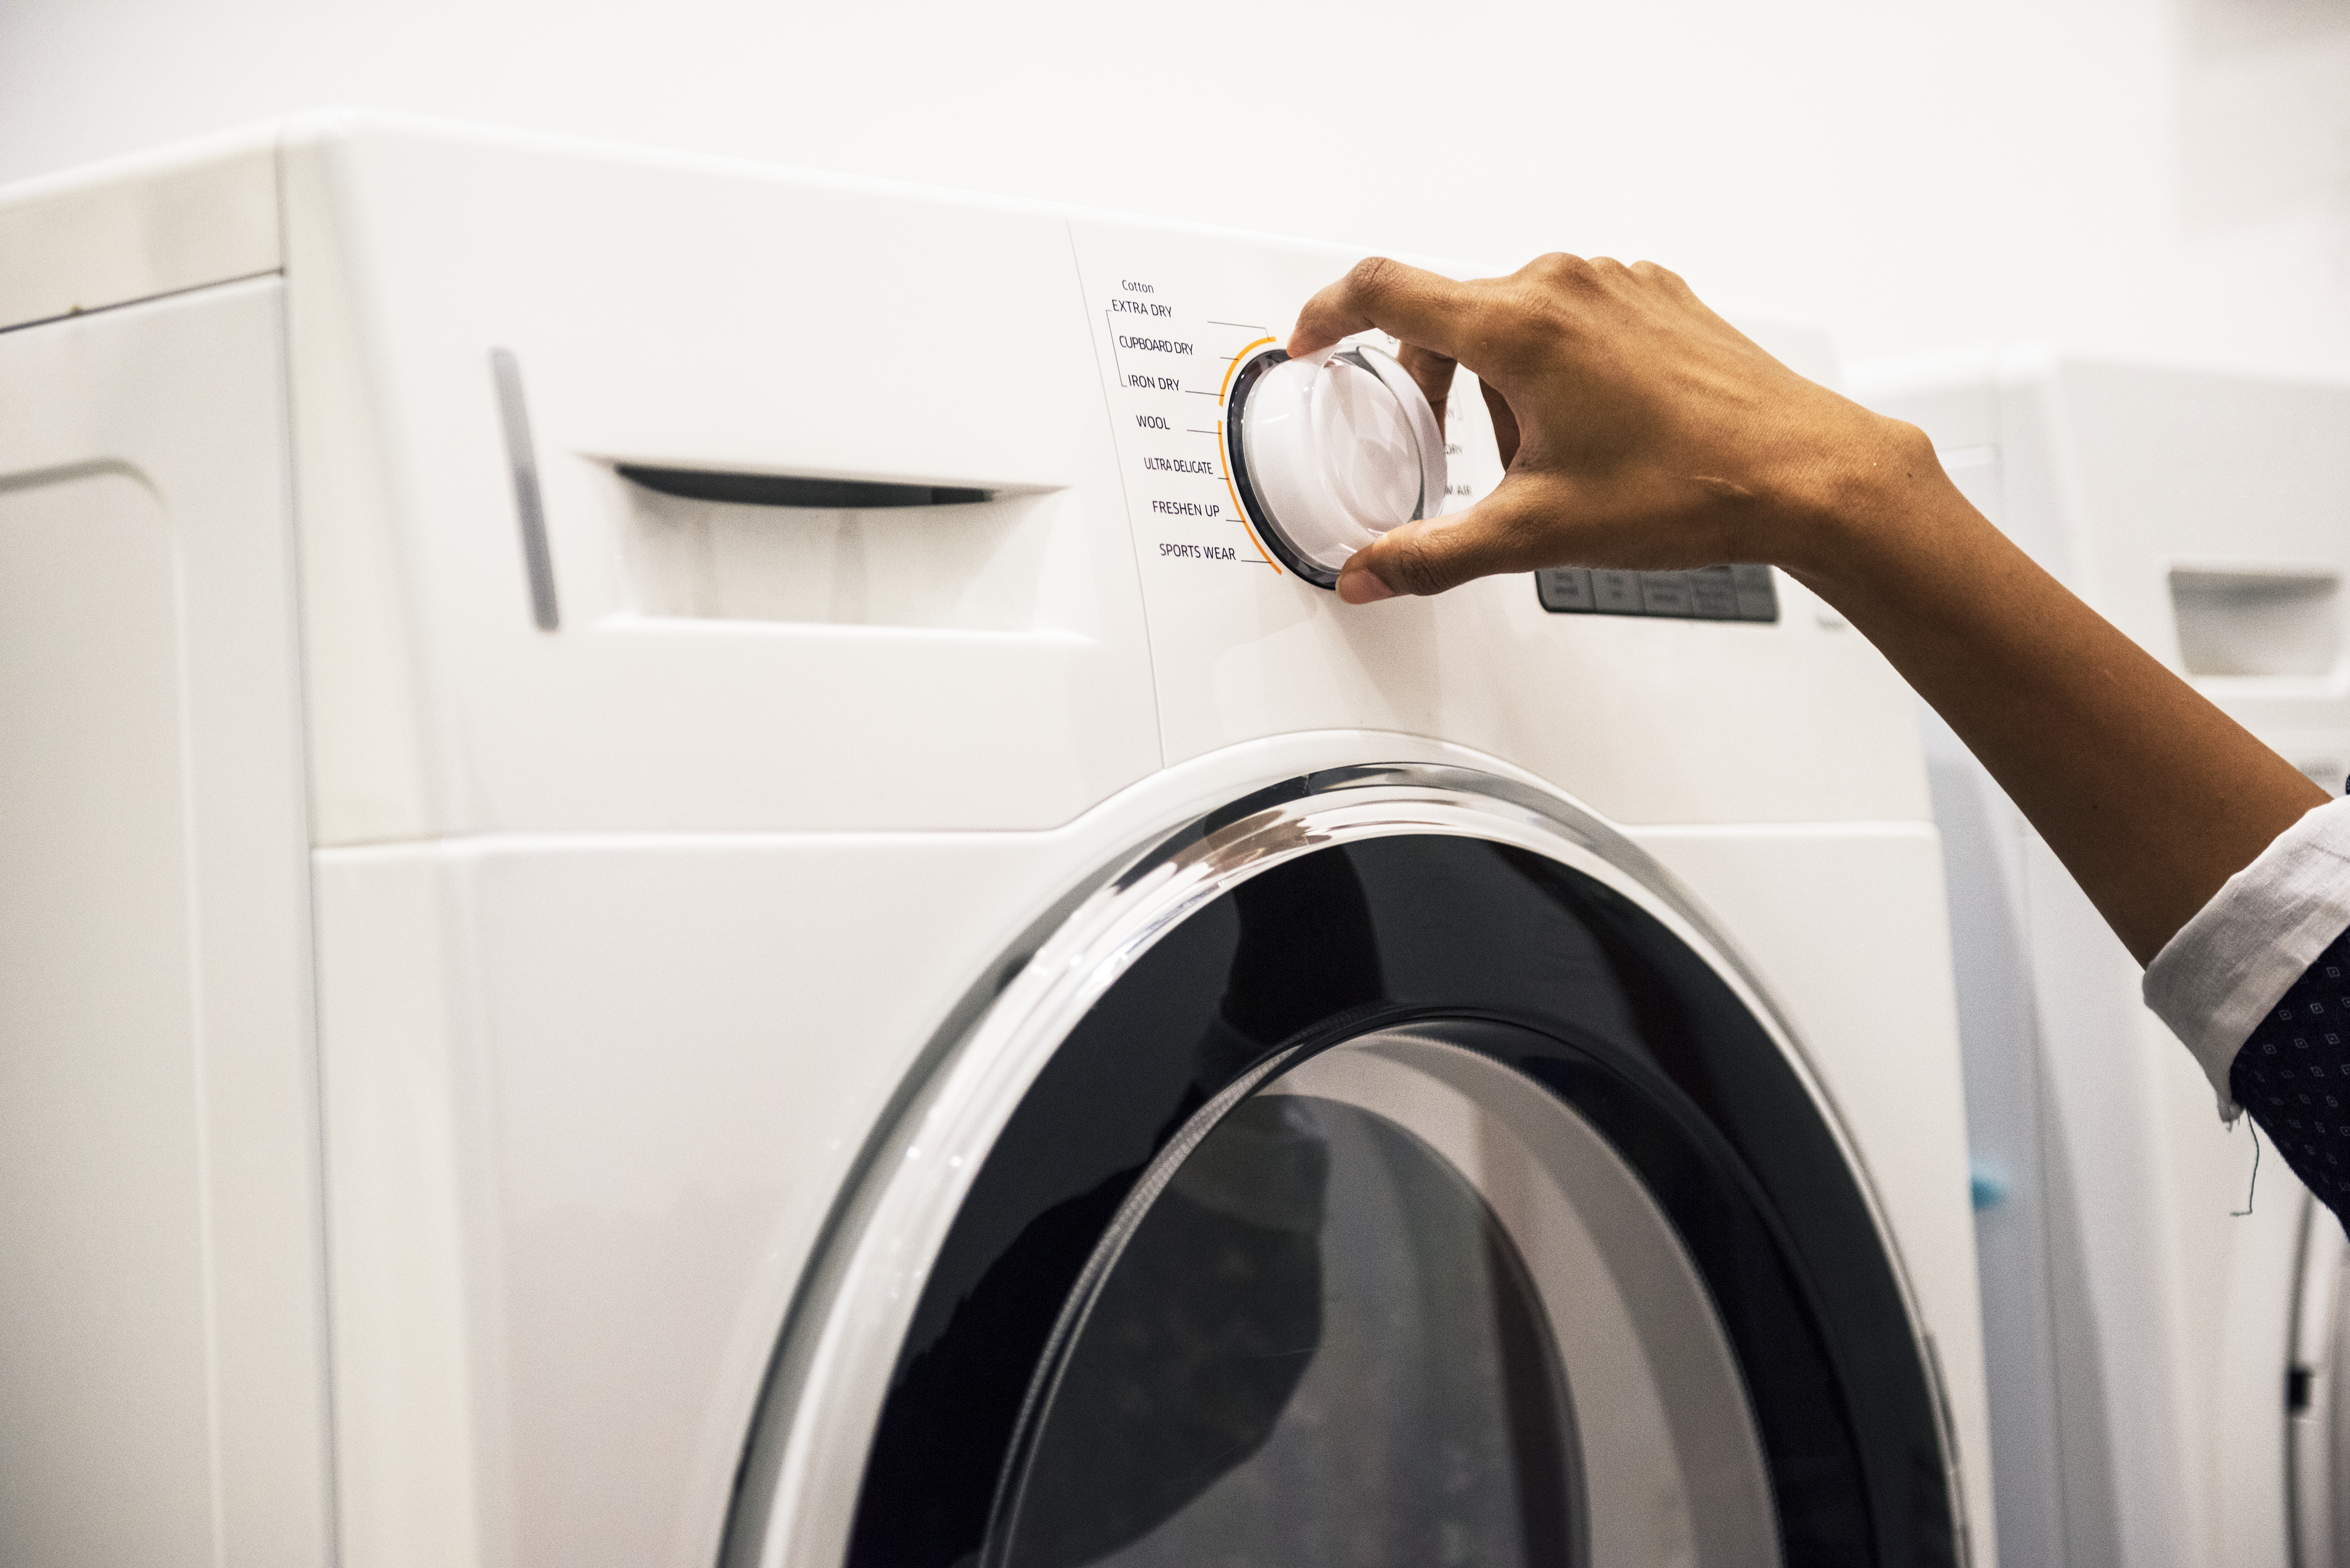 New energy efficiency rules on household tumble dryers help consumers save €2.8 bn